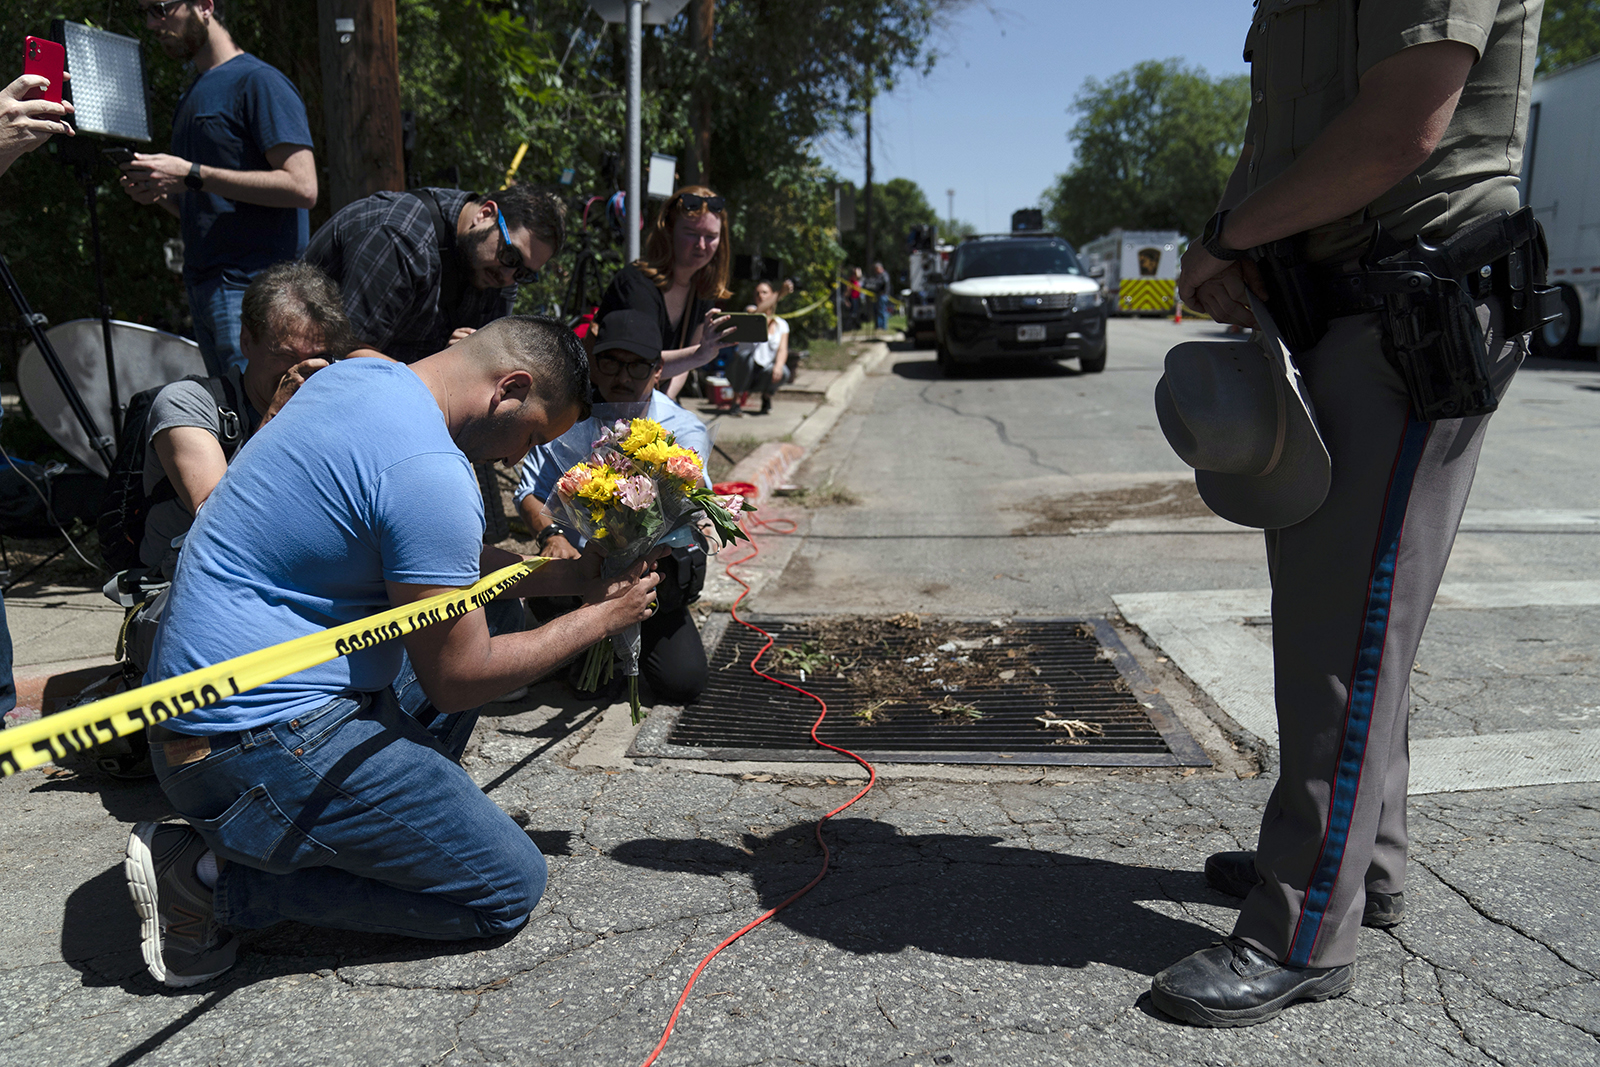 Joseph Avila, left, prays May 25, 2022, while holding flowers honoring the victims killed in Tuesday's shooting at Robb Elementary School in Uvalde, Texas. (AP Photo/Jae C. Hong)